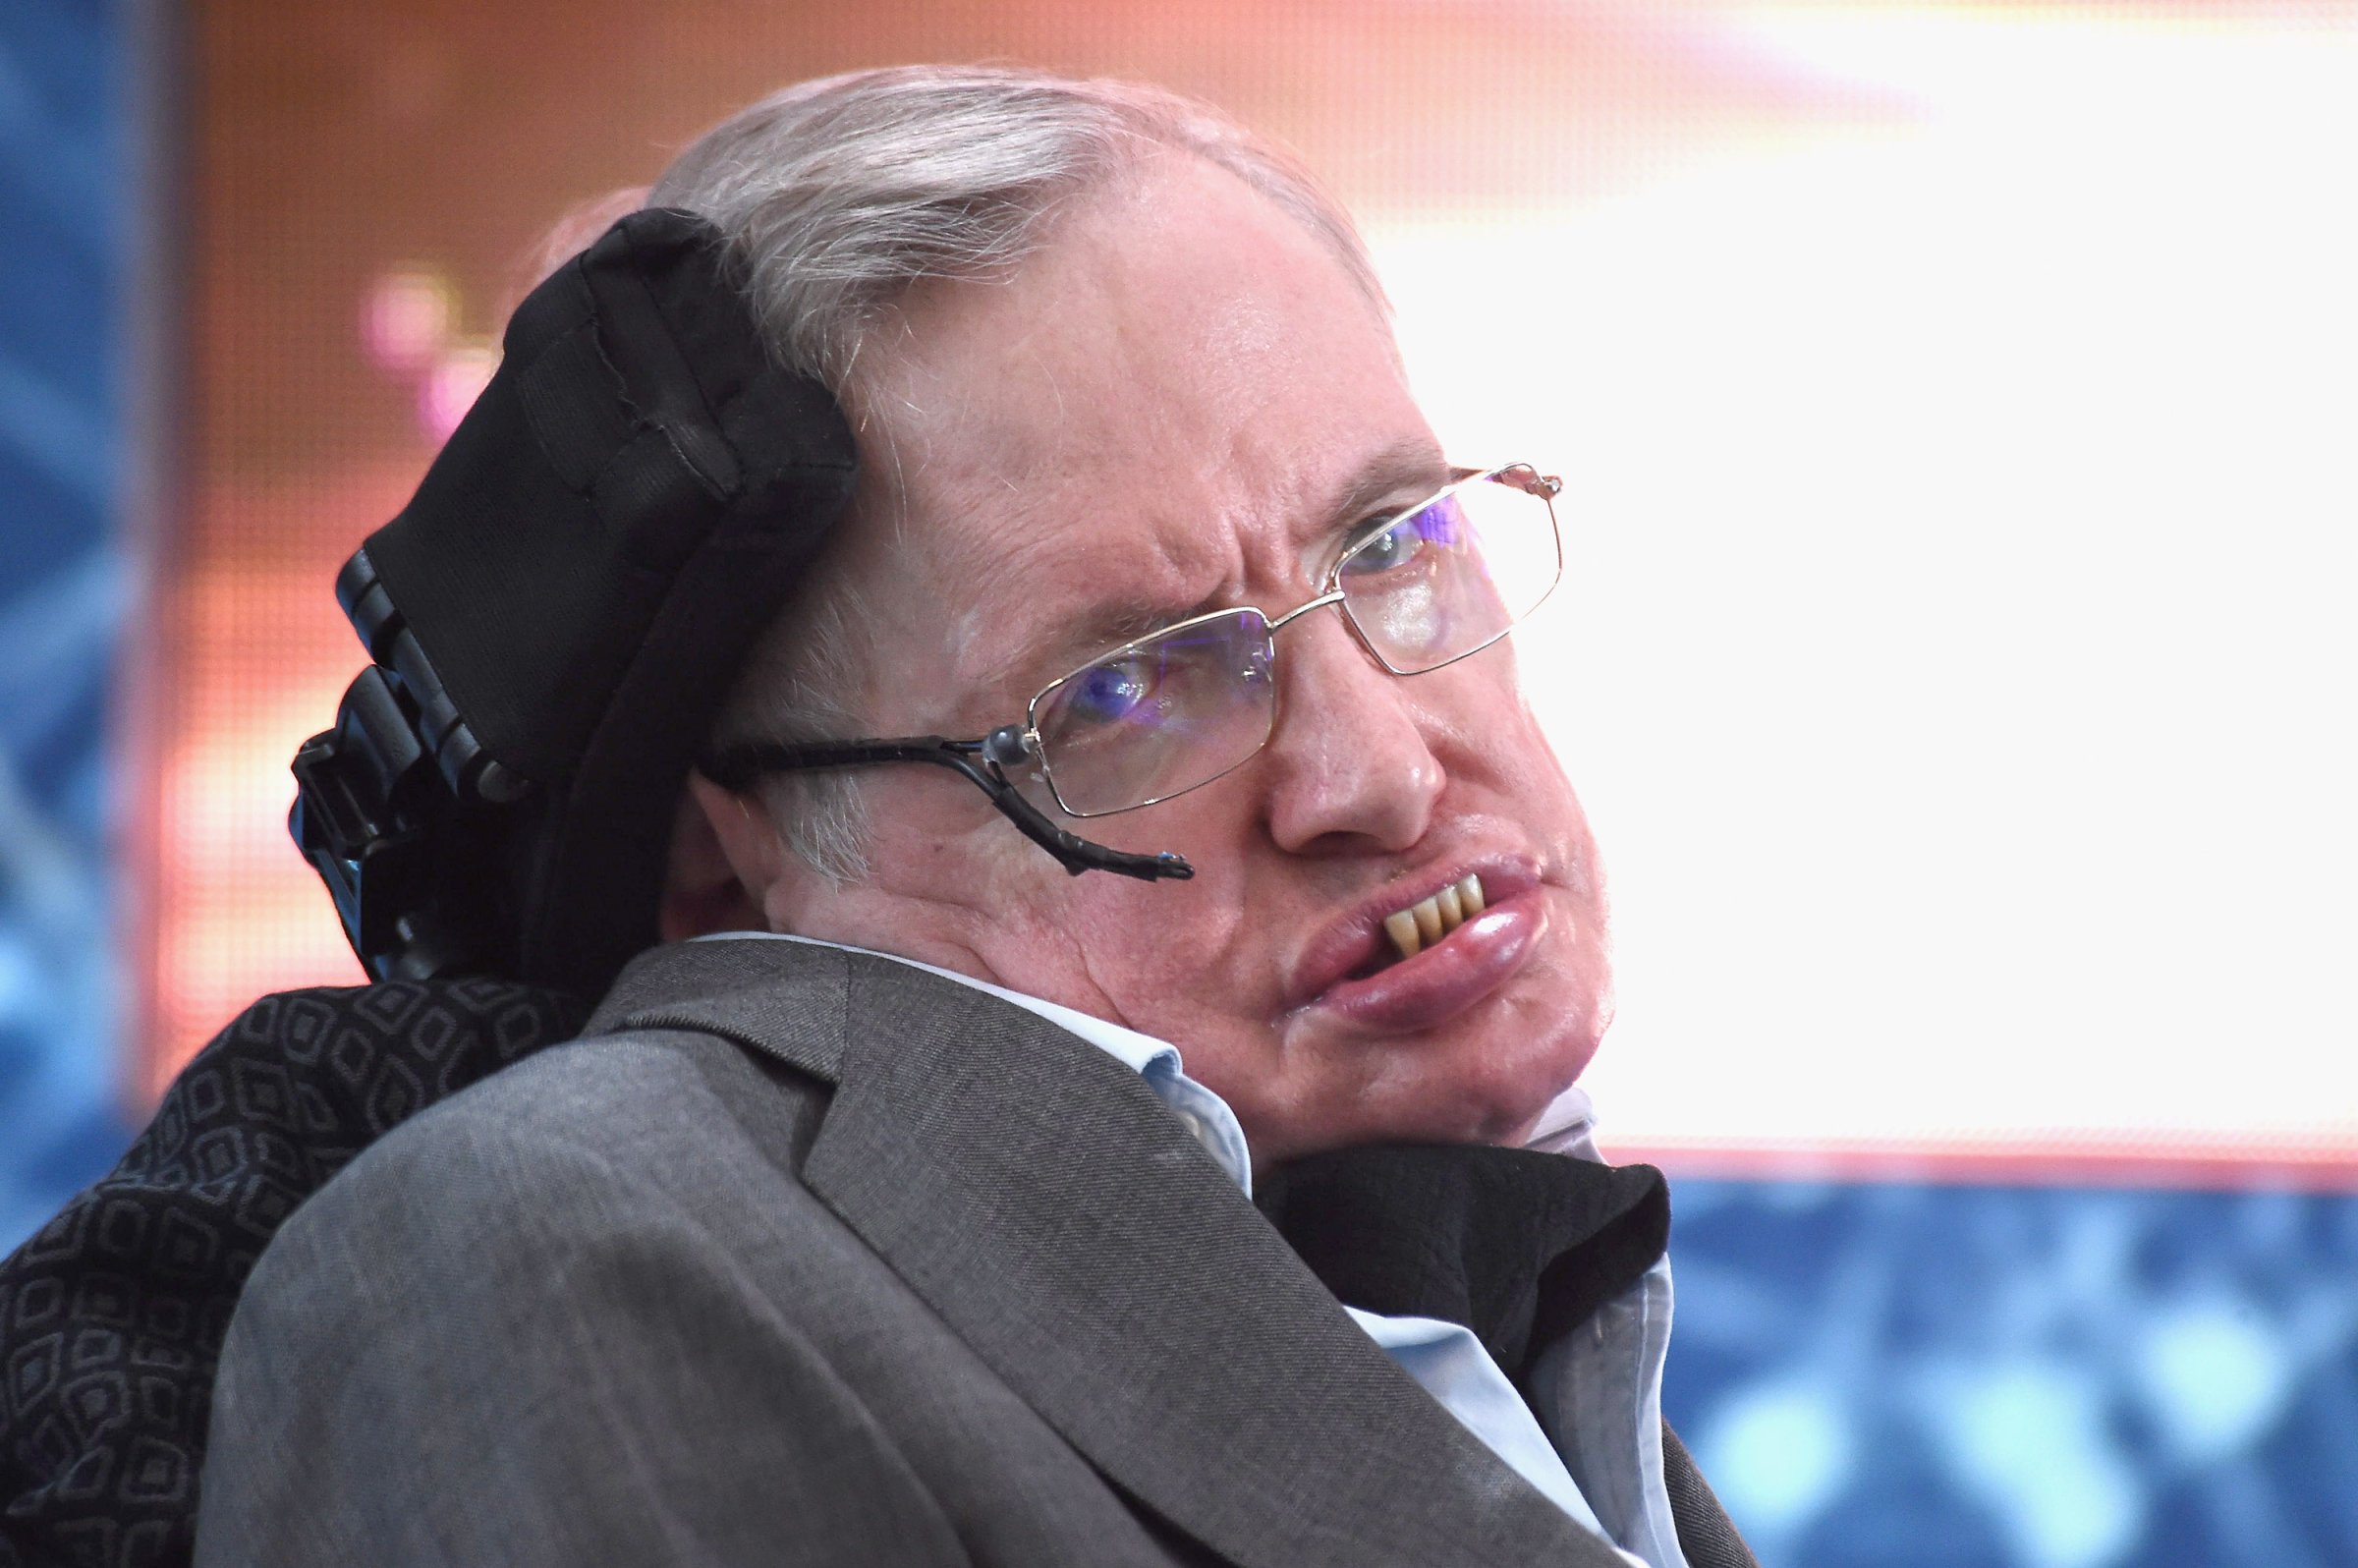 Cosmologist Stephen Hawking attends the New Space Exploration Initiative "Breakthrough Starshot" Announcement at One World Observatory on April 12, 2016 in New York City.